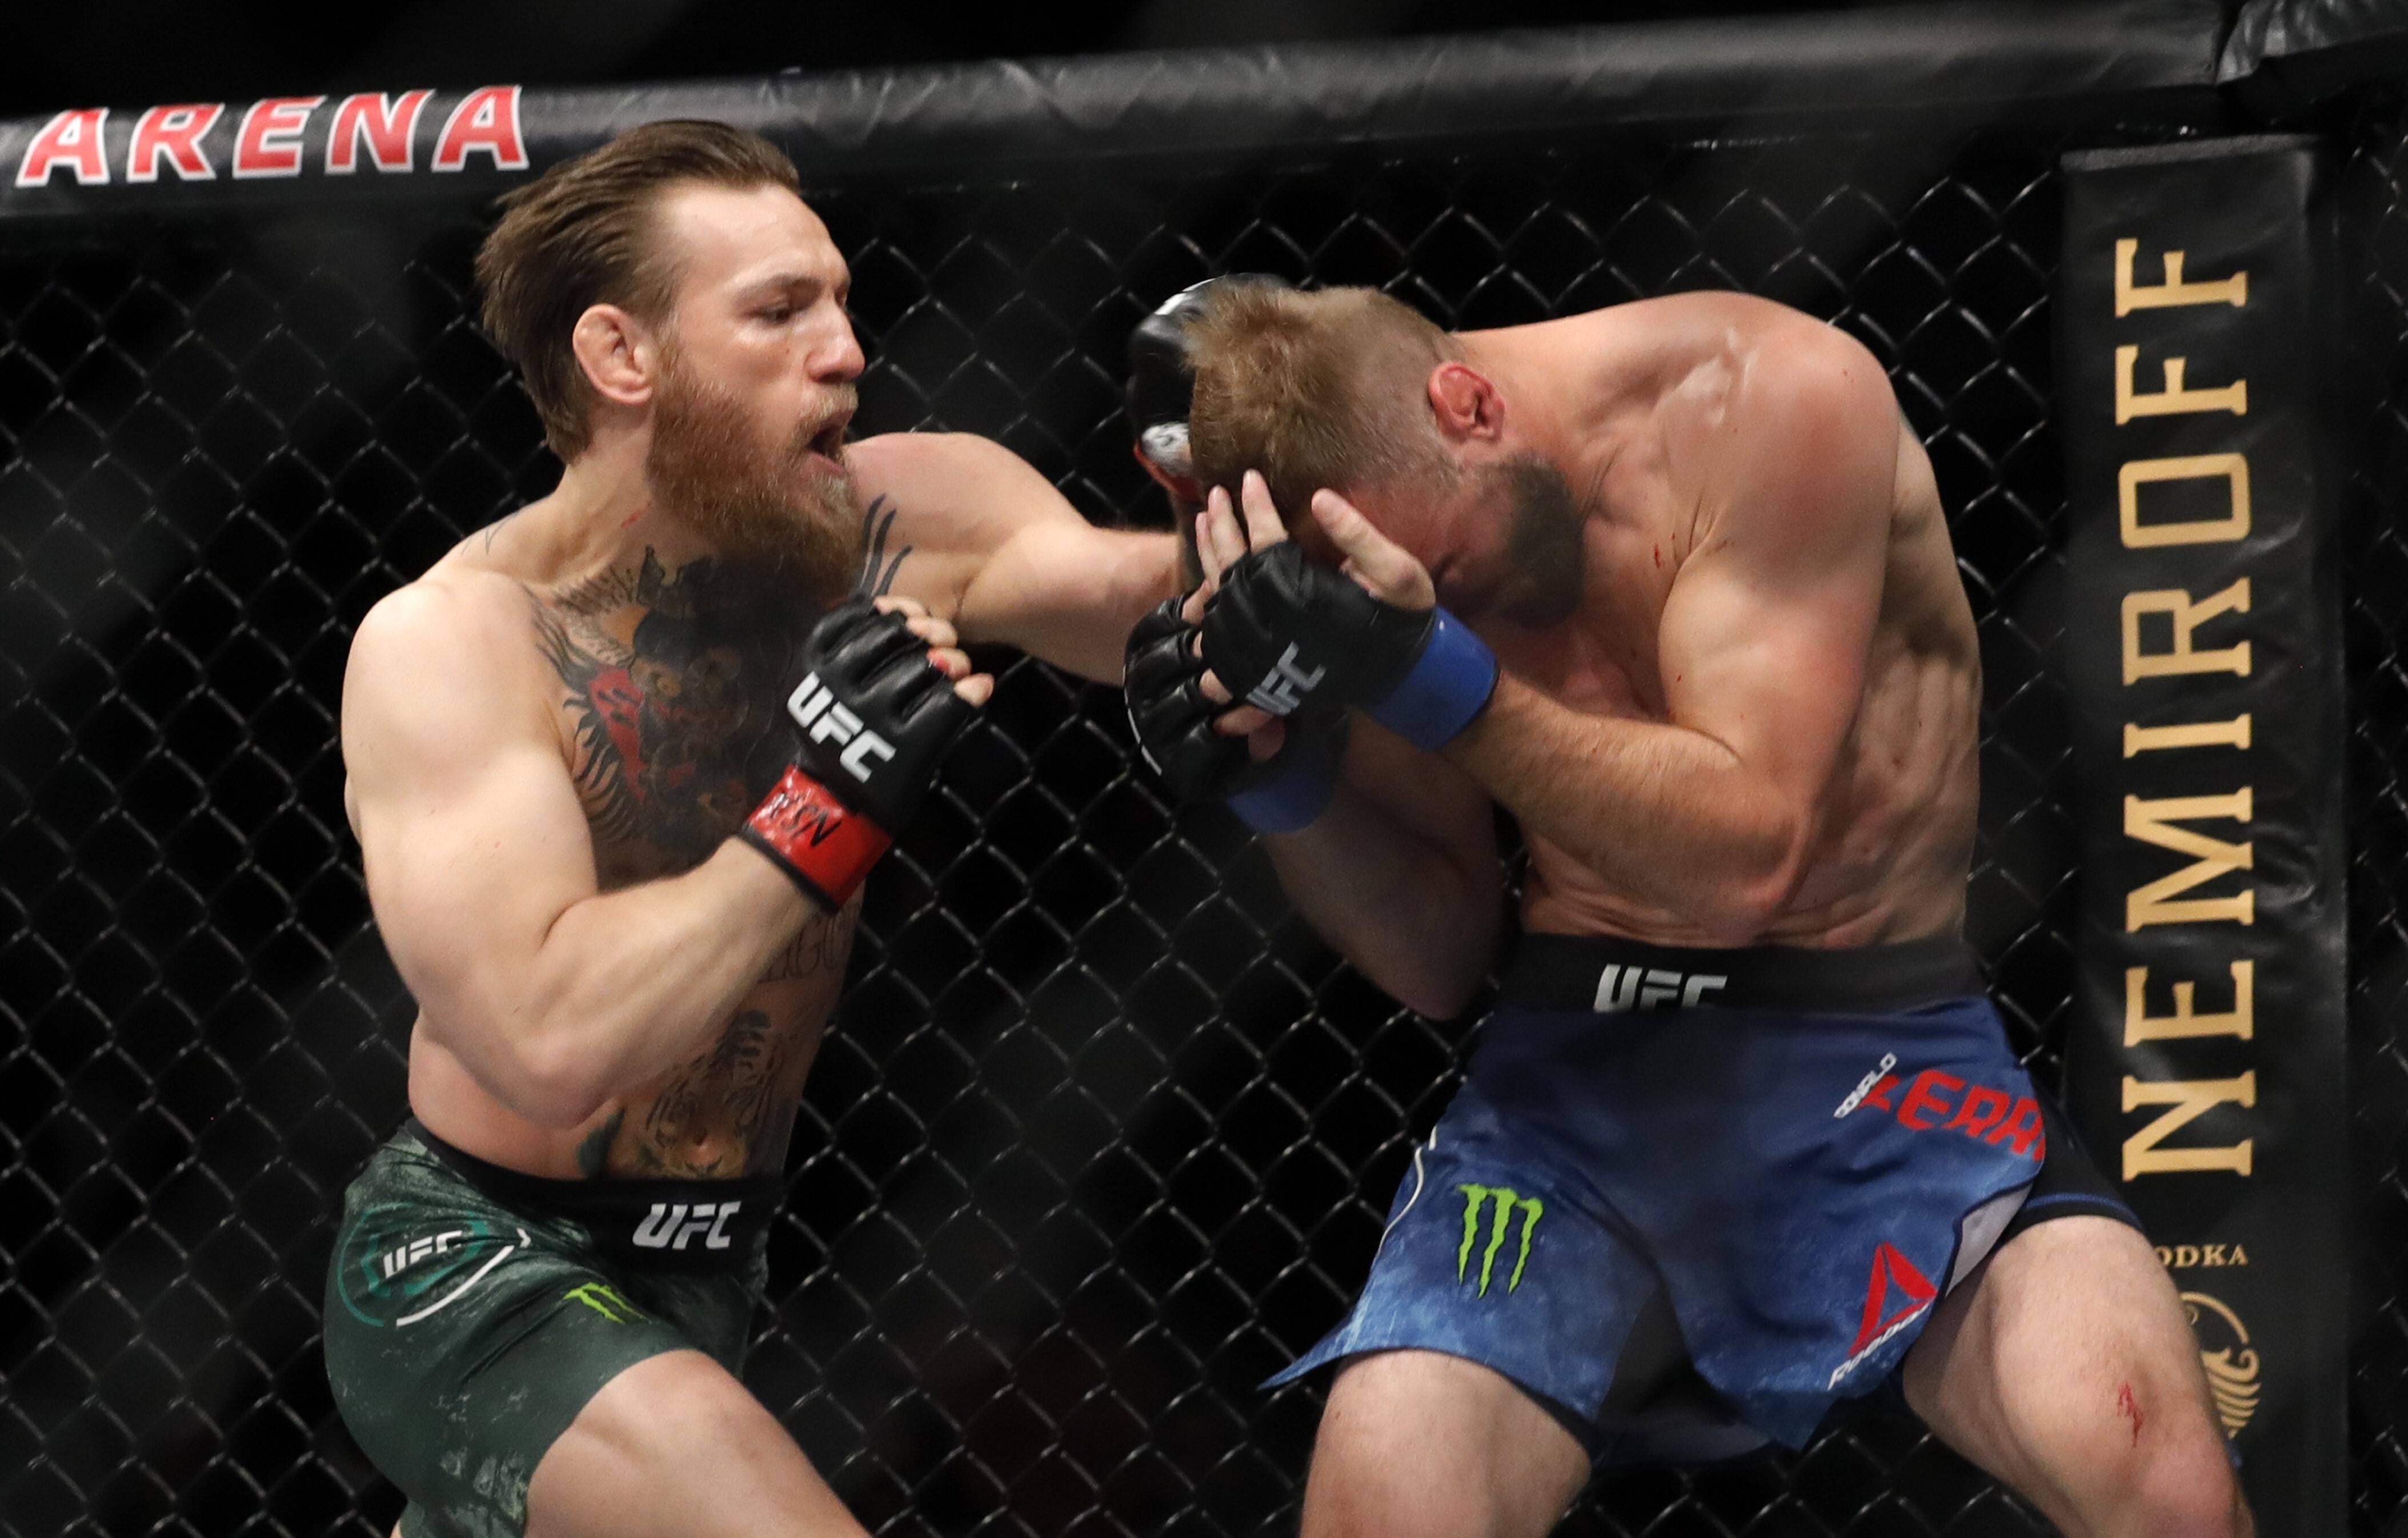 Conor McGregor punches Donald Cerrone in their welterweight bout at UFC 246 in January. Photo: AFP